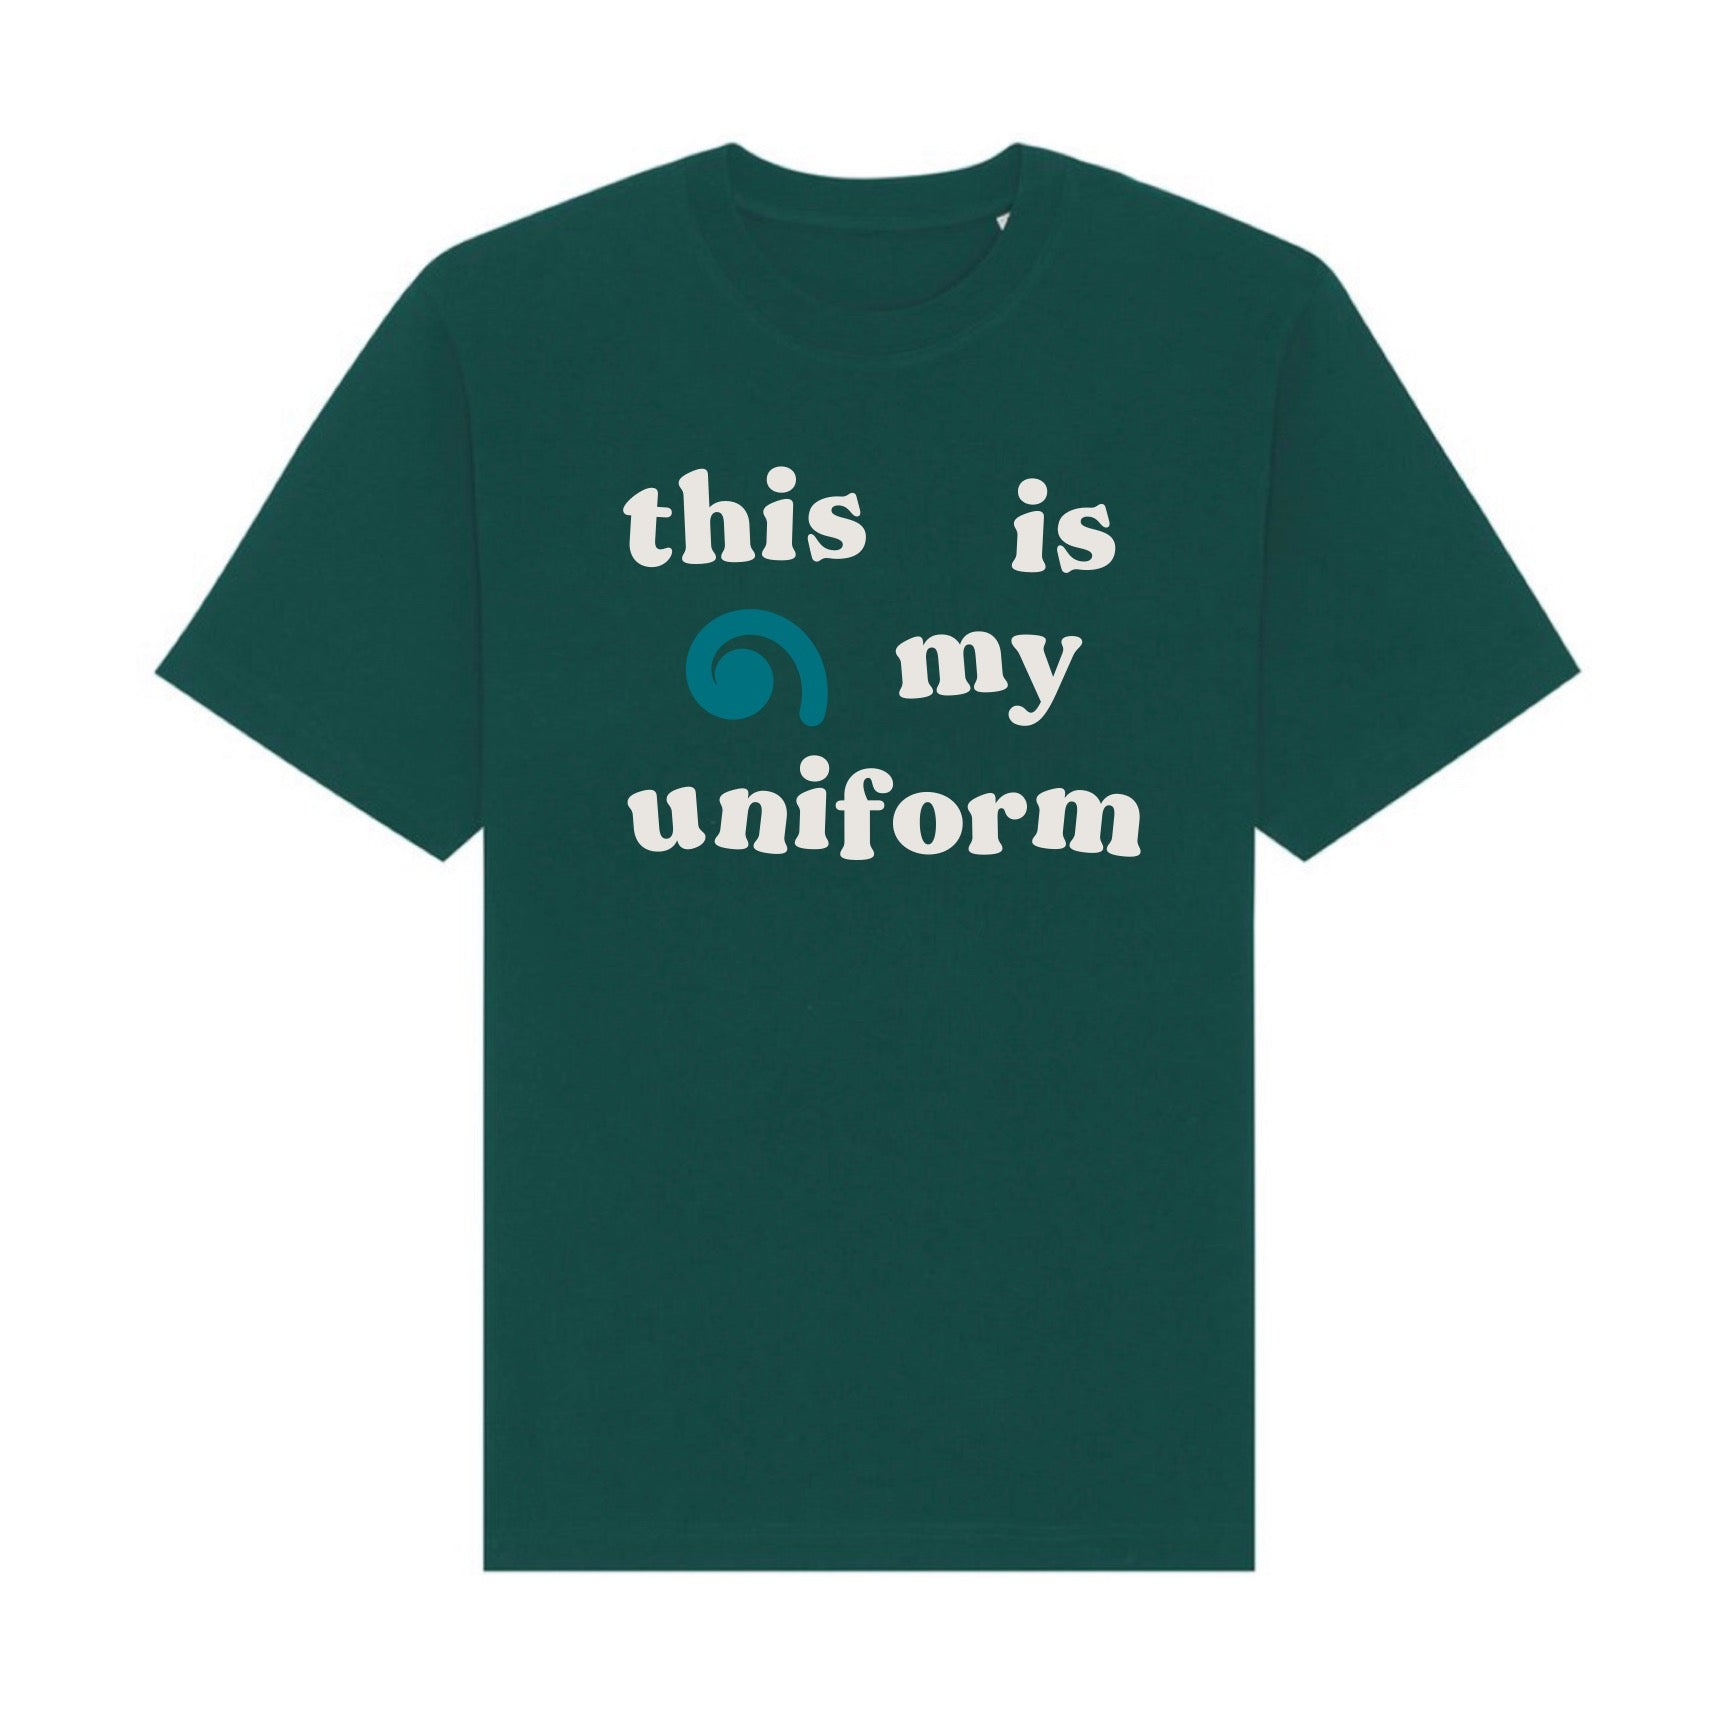 This is my uniform T-shirt - Bottle Green